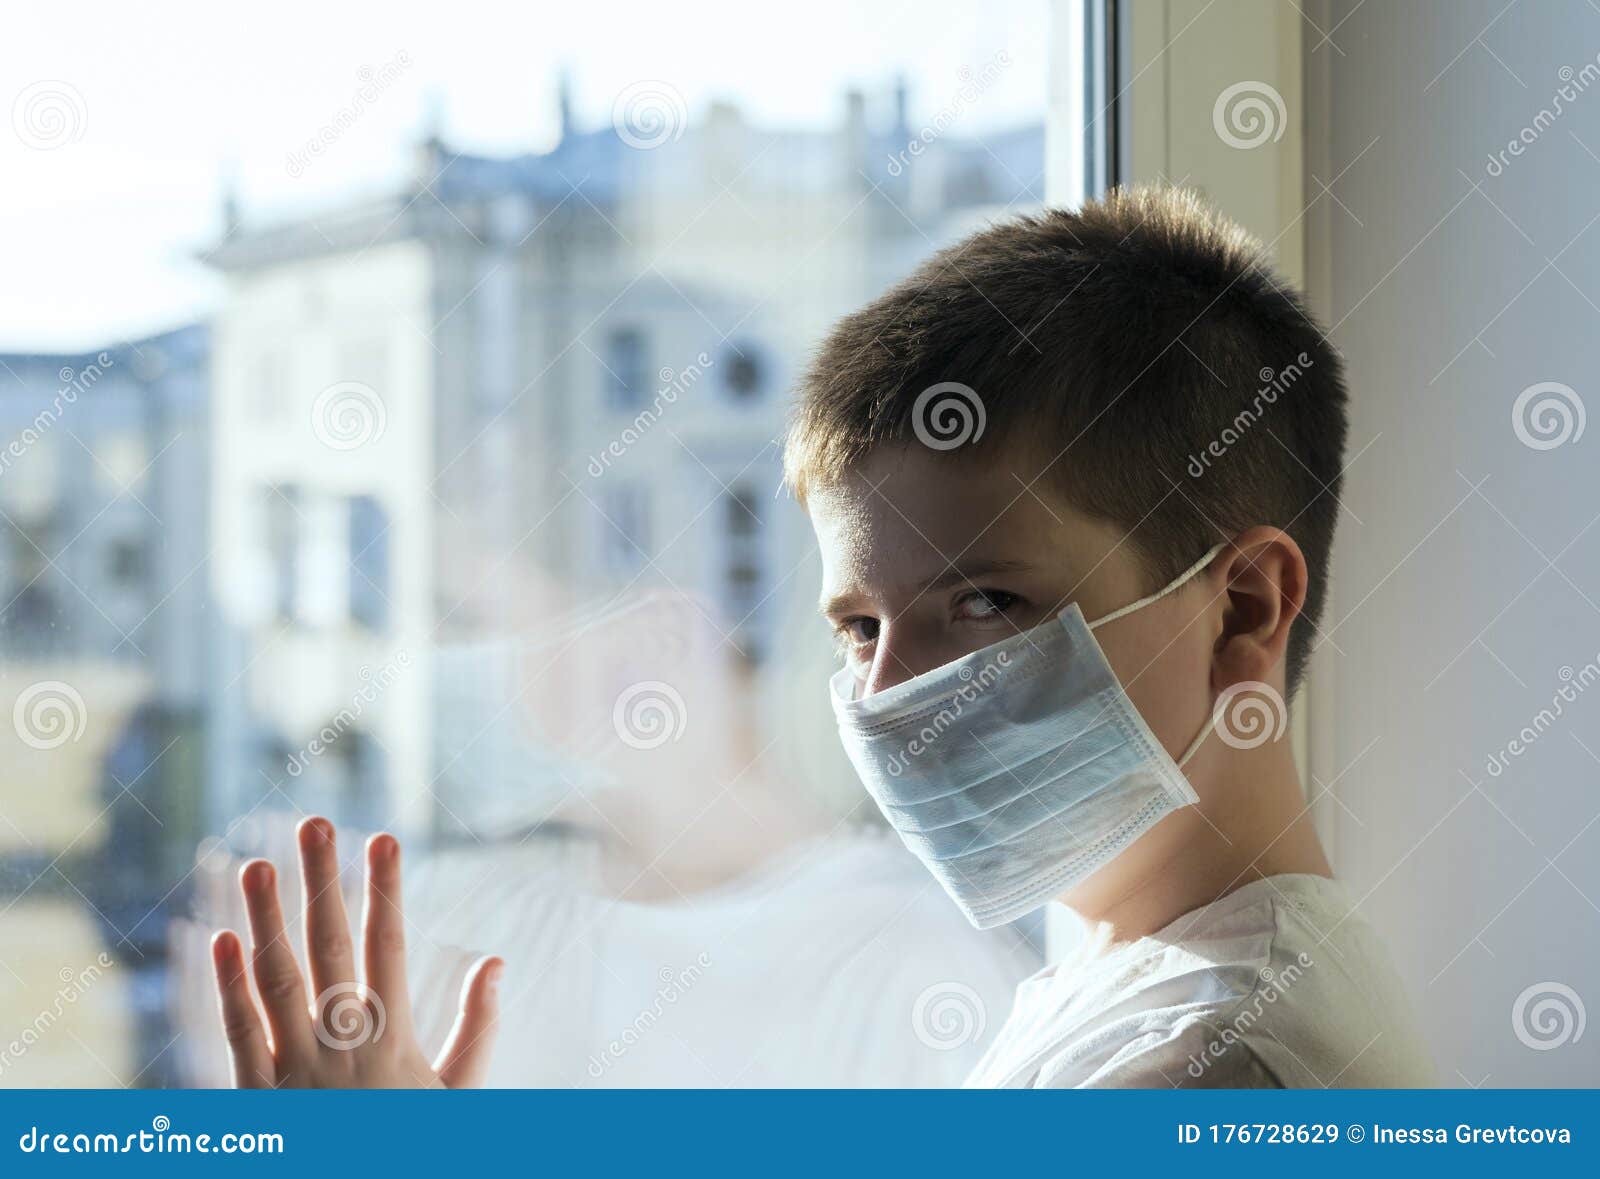 a sick boy in a medical mask stands at the window and looks longingly.